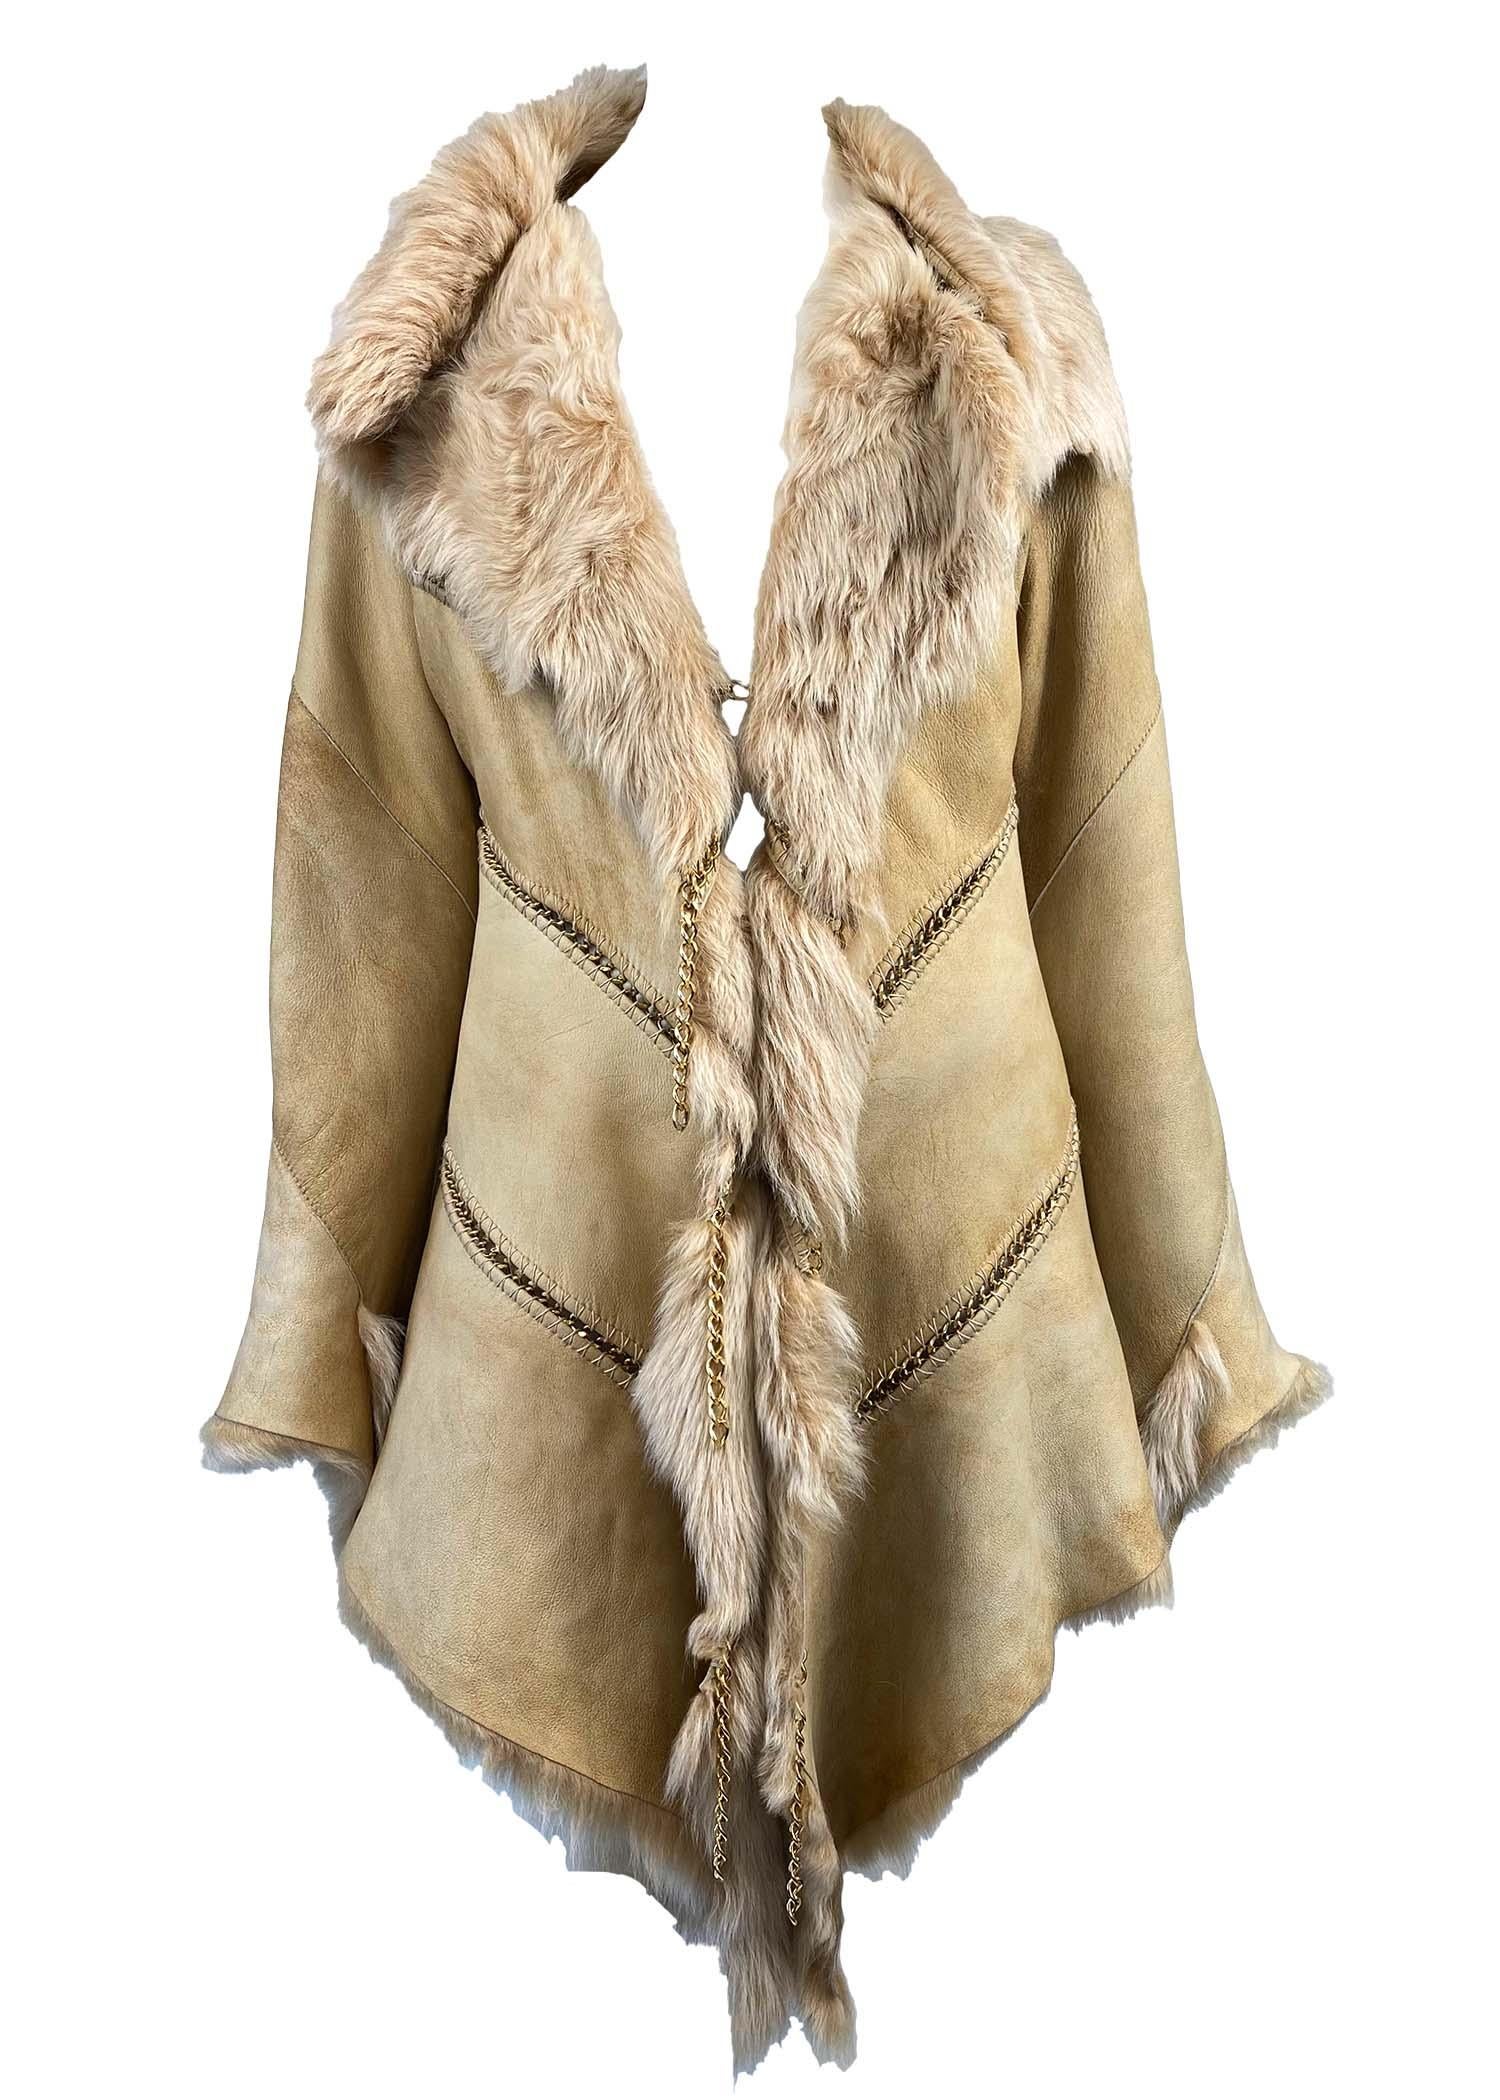 Presenting a chain detail suede and shearling coat by Roberto Cavalli. This piece was produced for Cavalli's F/W 2003 collection and features gold metal chains between panels of thick suede shearling. The chains continue to the exterior of the coat,